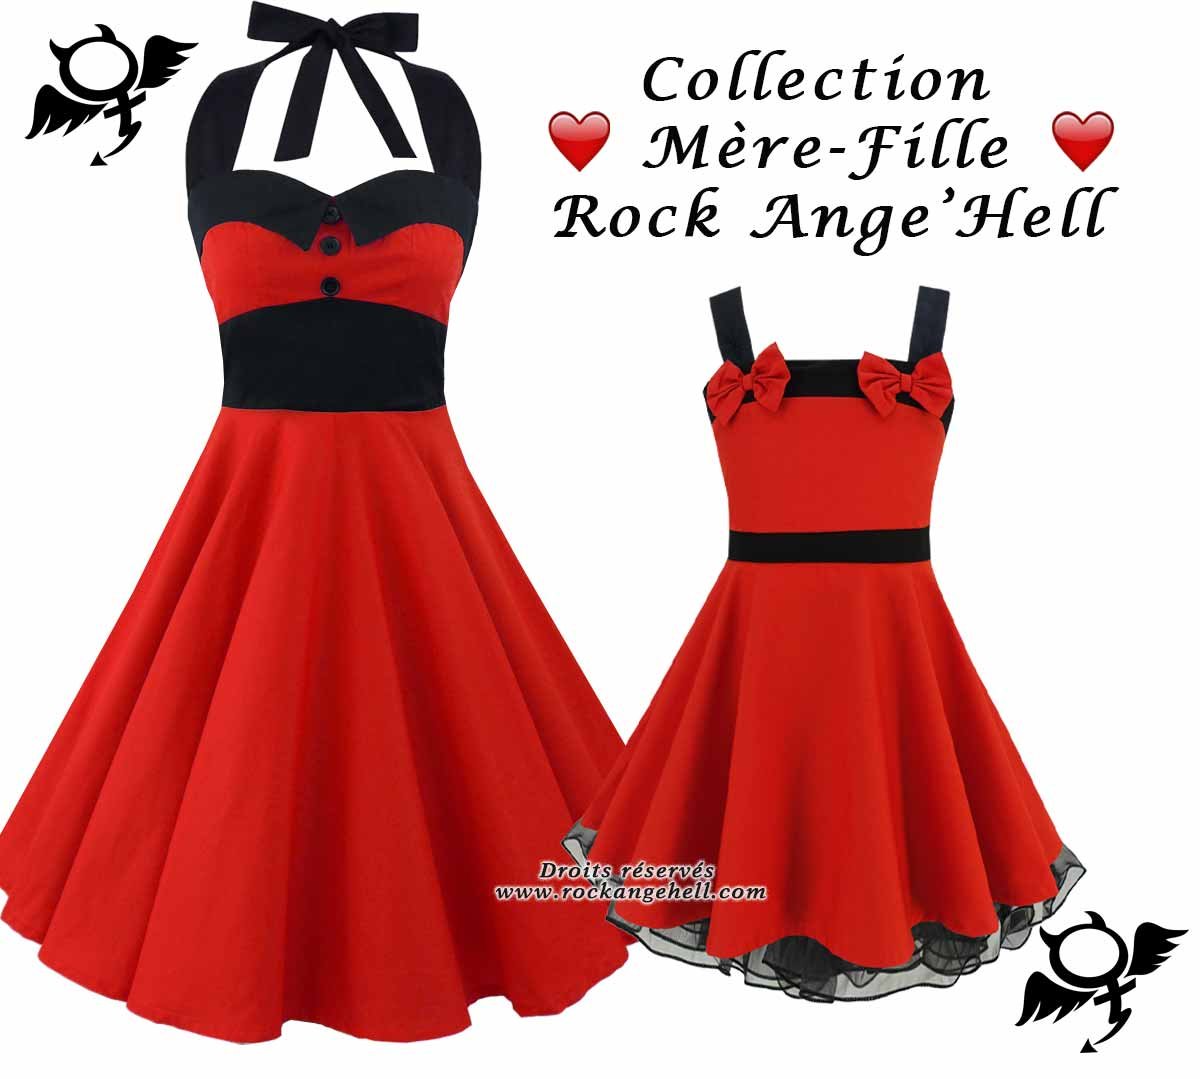 Collection-Rock-AngeHell-Mere-Fille11.jpg